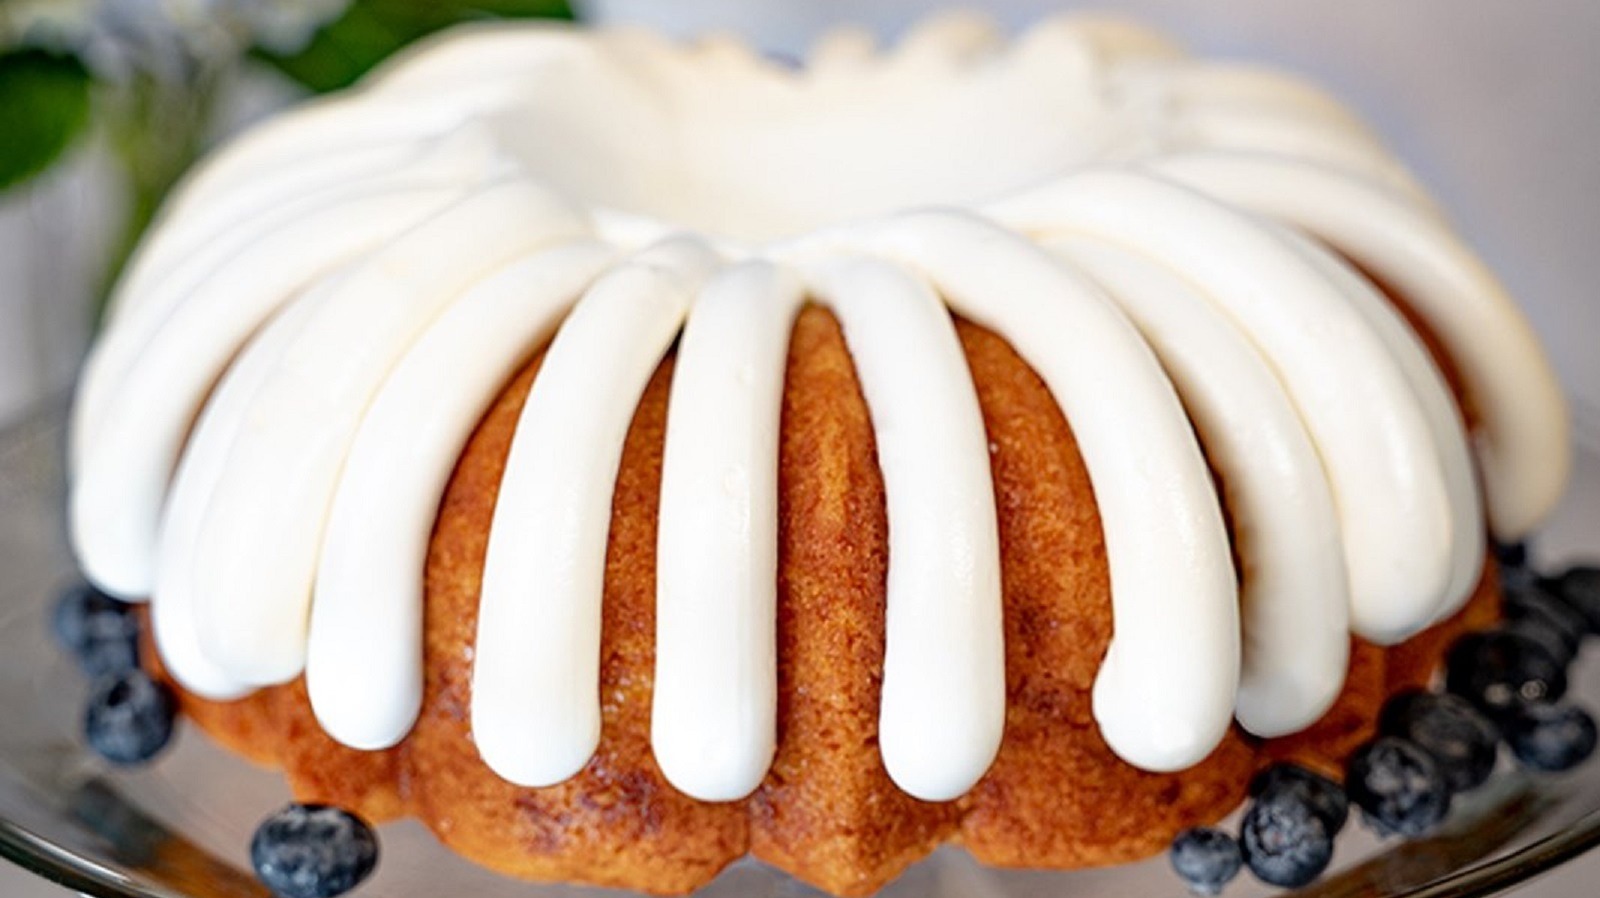 Nothing Bundt Cakes will soon open new locations in Smyrna, Brentwood,  Century Farms - Nashville Business Journal